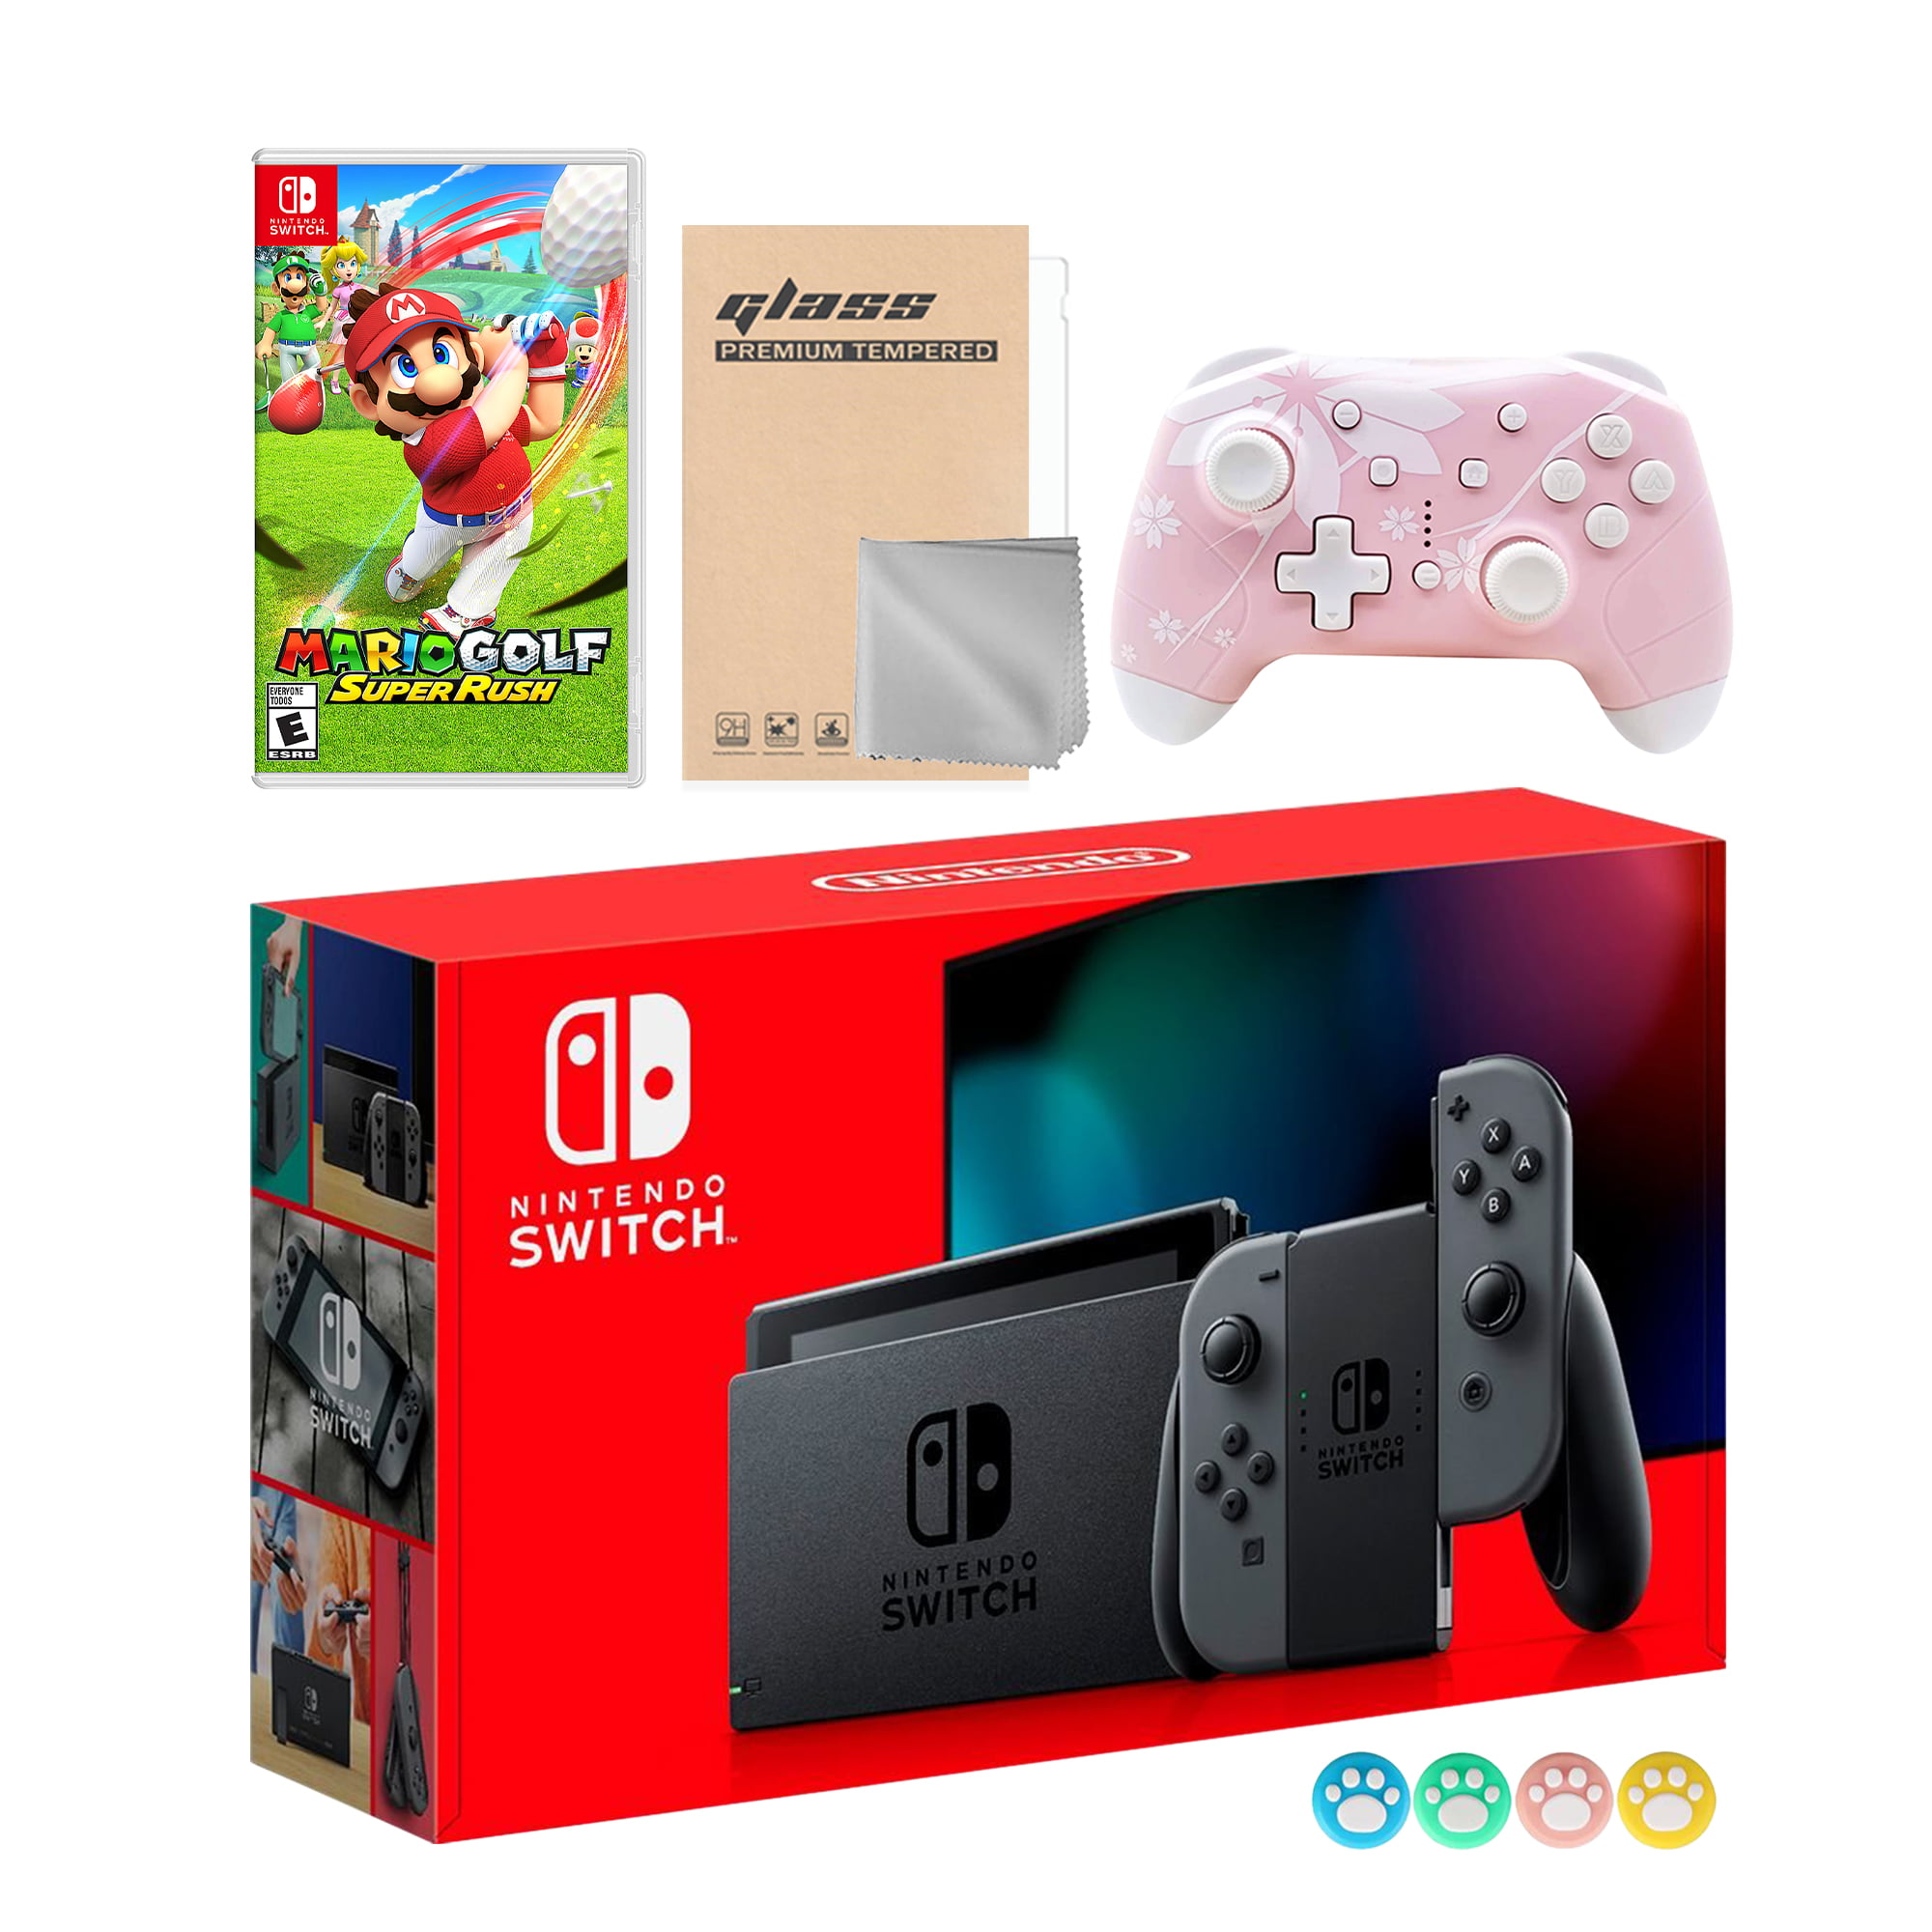 germ implicit Patience Nintendo Switch Gray Joy-Con Console Set, Bundle With Mario Golf: Super  Rush And Mytrix Wireless Switch Pro Controller and Accessories - Walmart.com